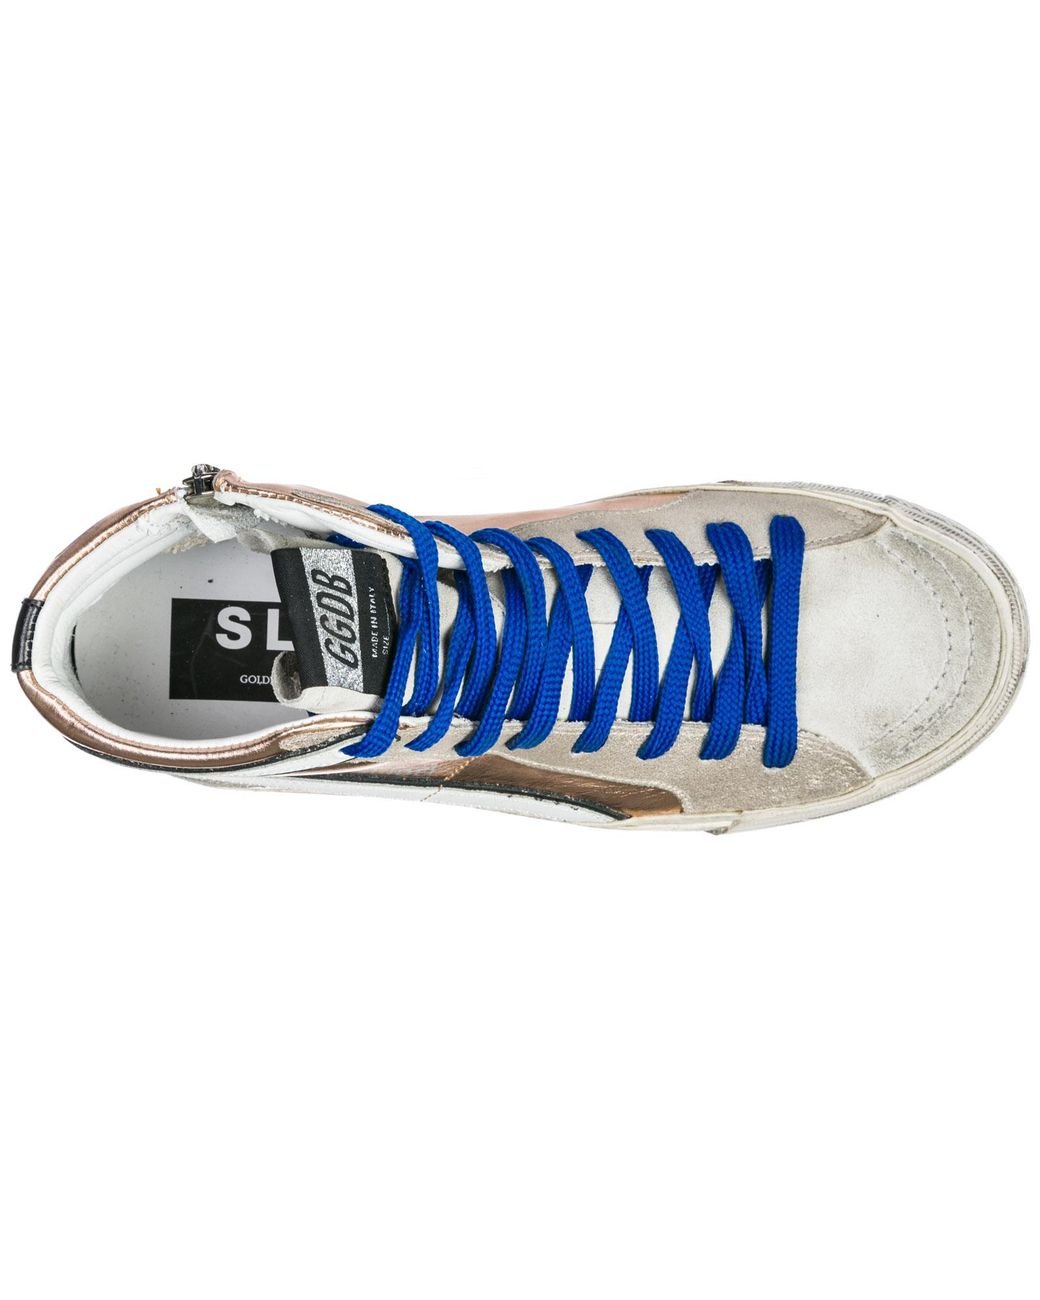 Women's Blue Shoes High Top Leather 